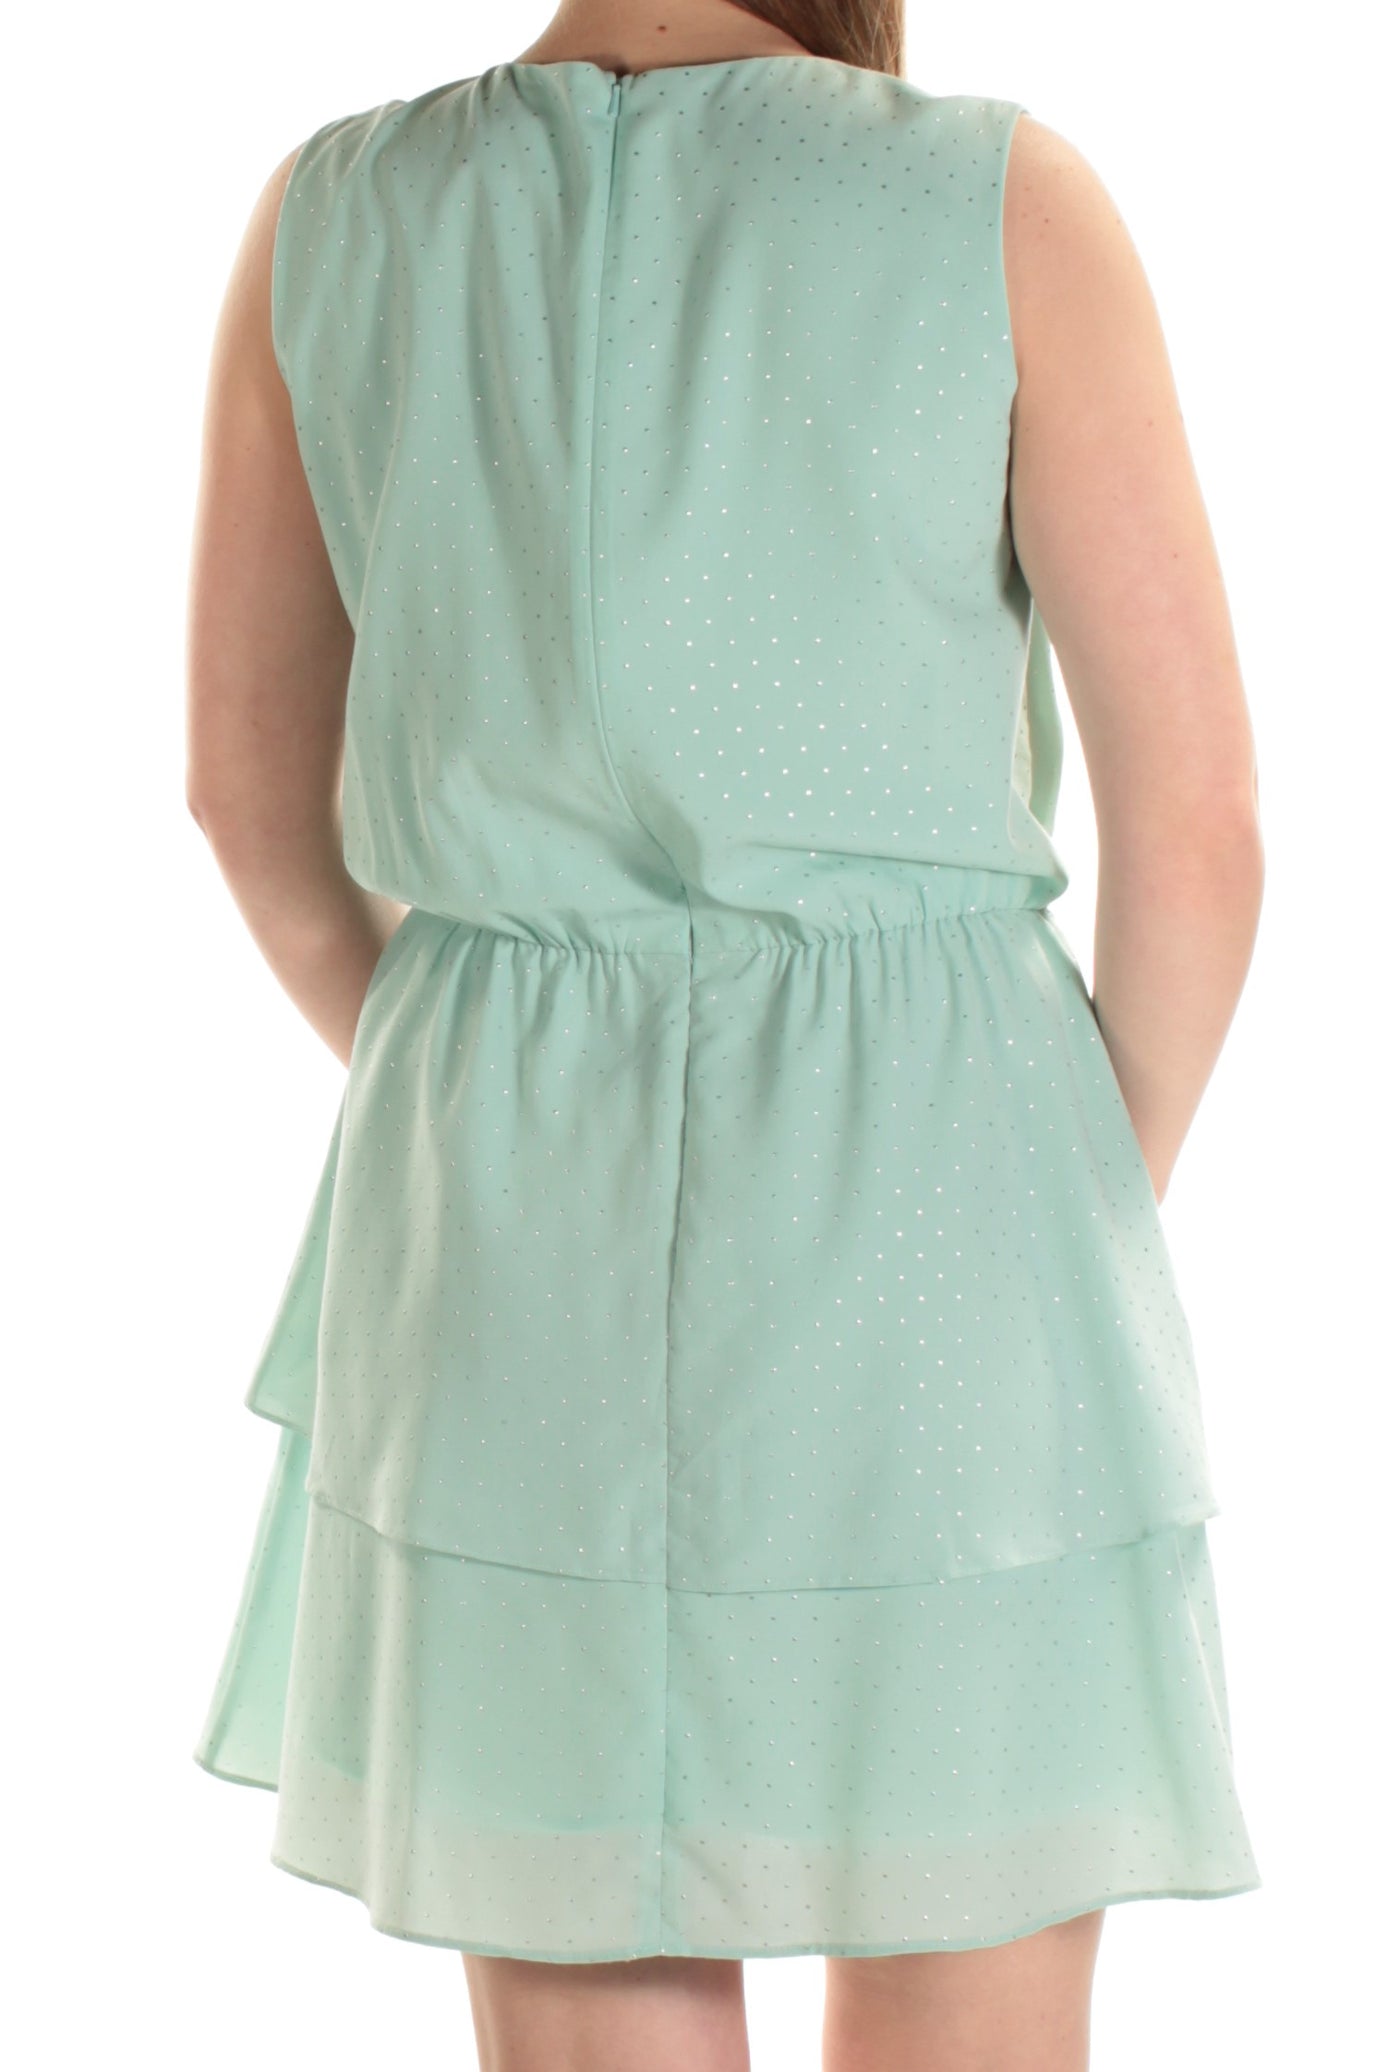 CYNTHIA ROWLEY Womens Green Sleeveless Crew Neck Above The Knee Fit + Flare Dress